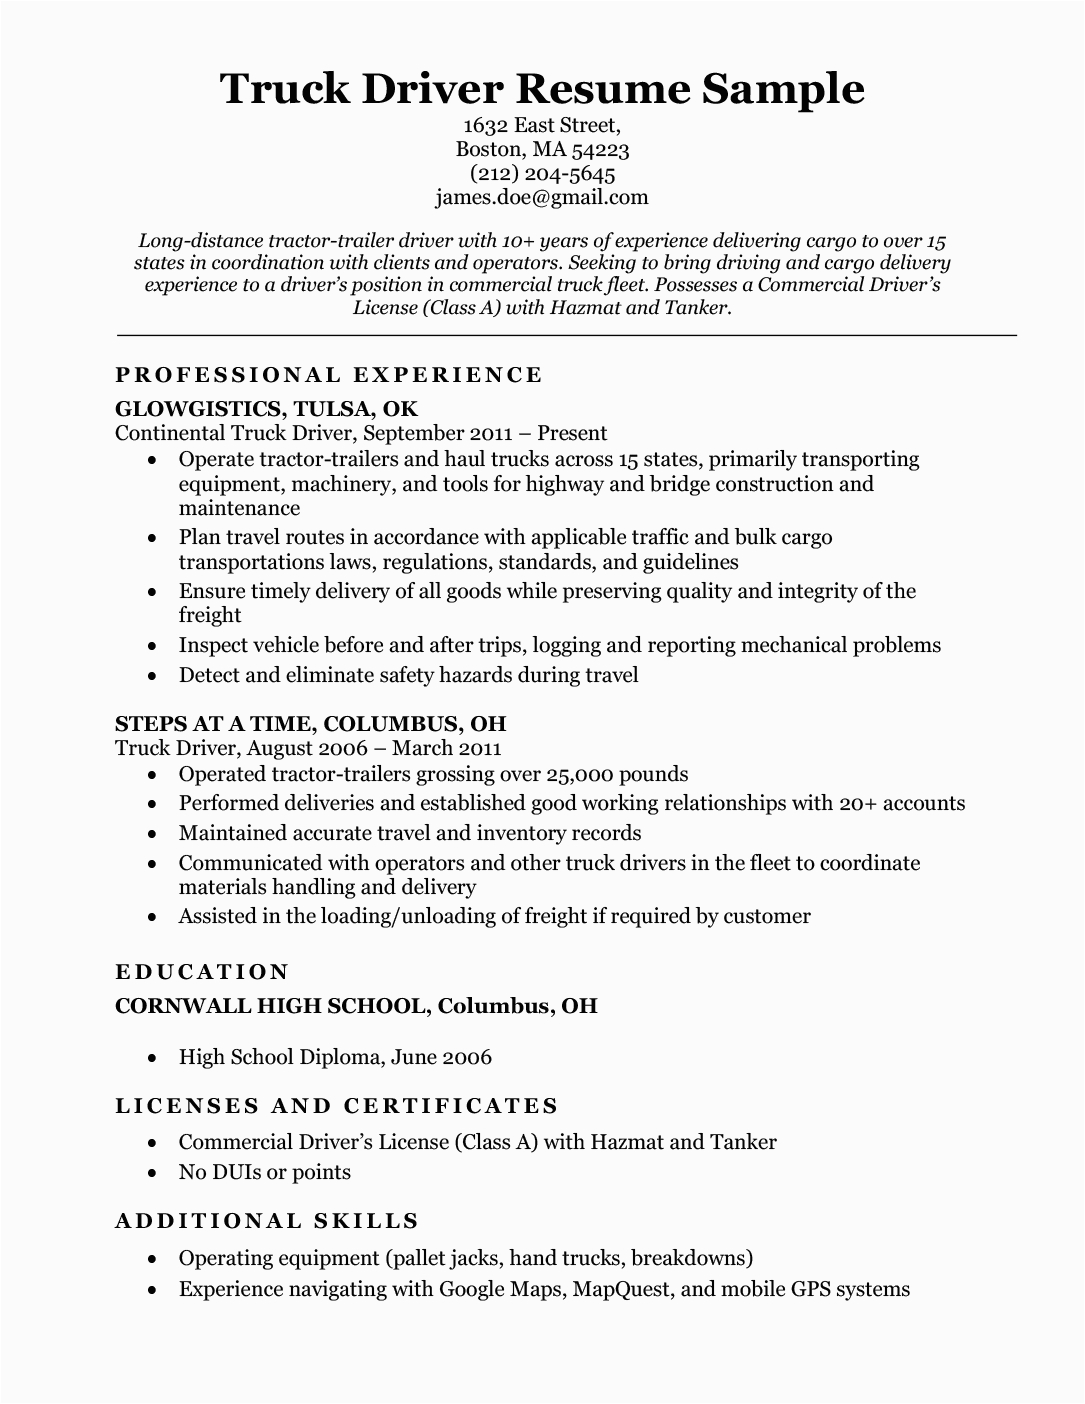 Sample Resume for Truck Driver with No Experience Sample Resume for Truck Driver with No Experience